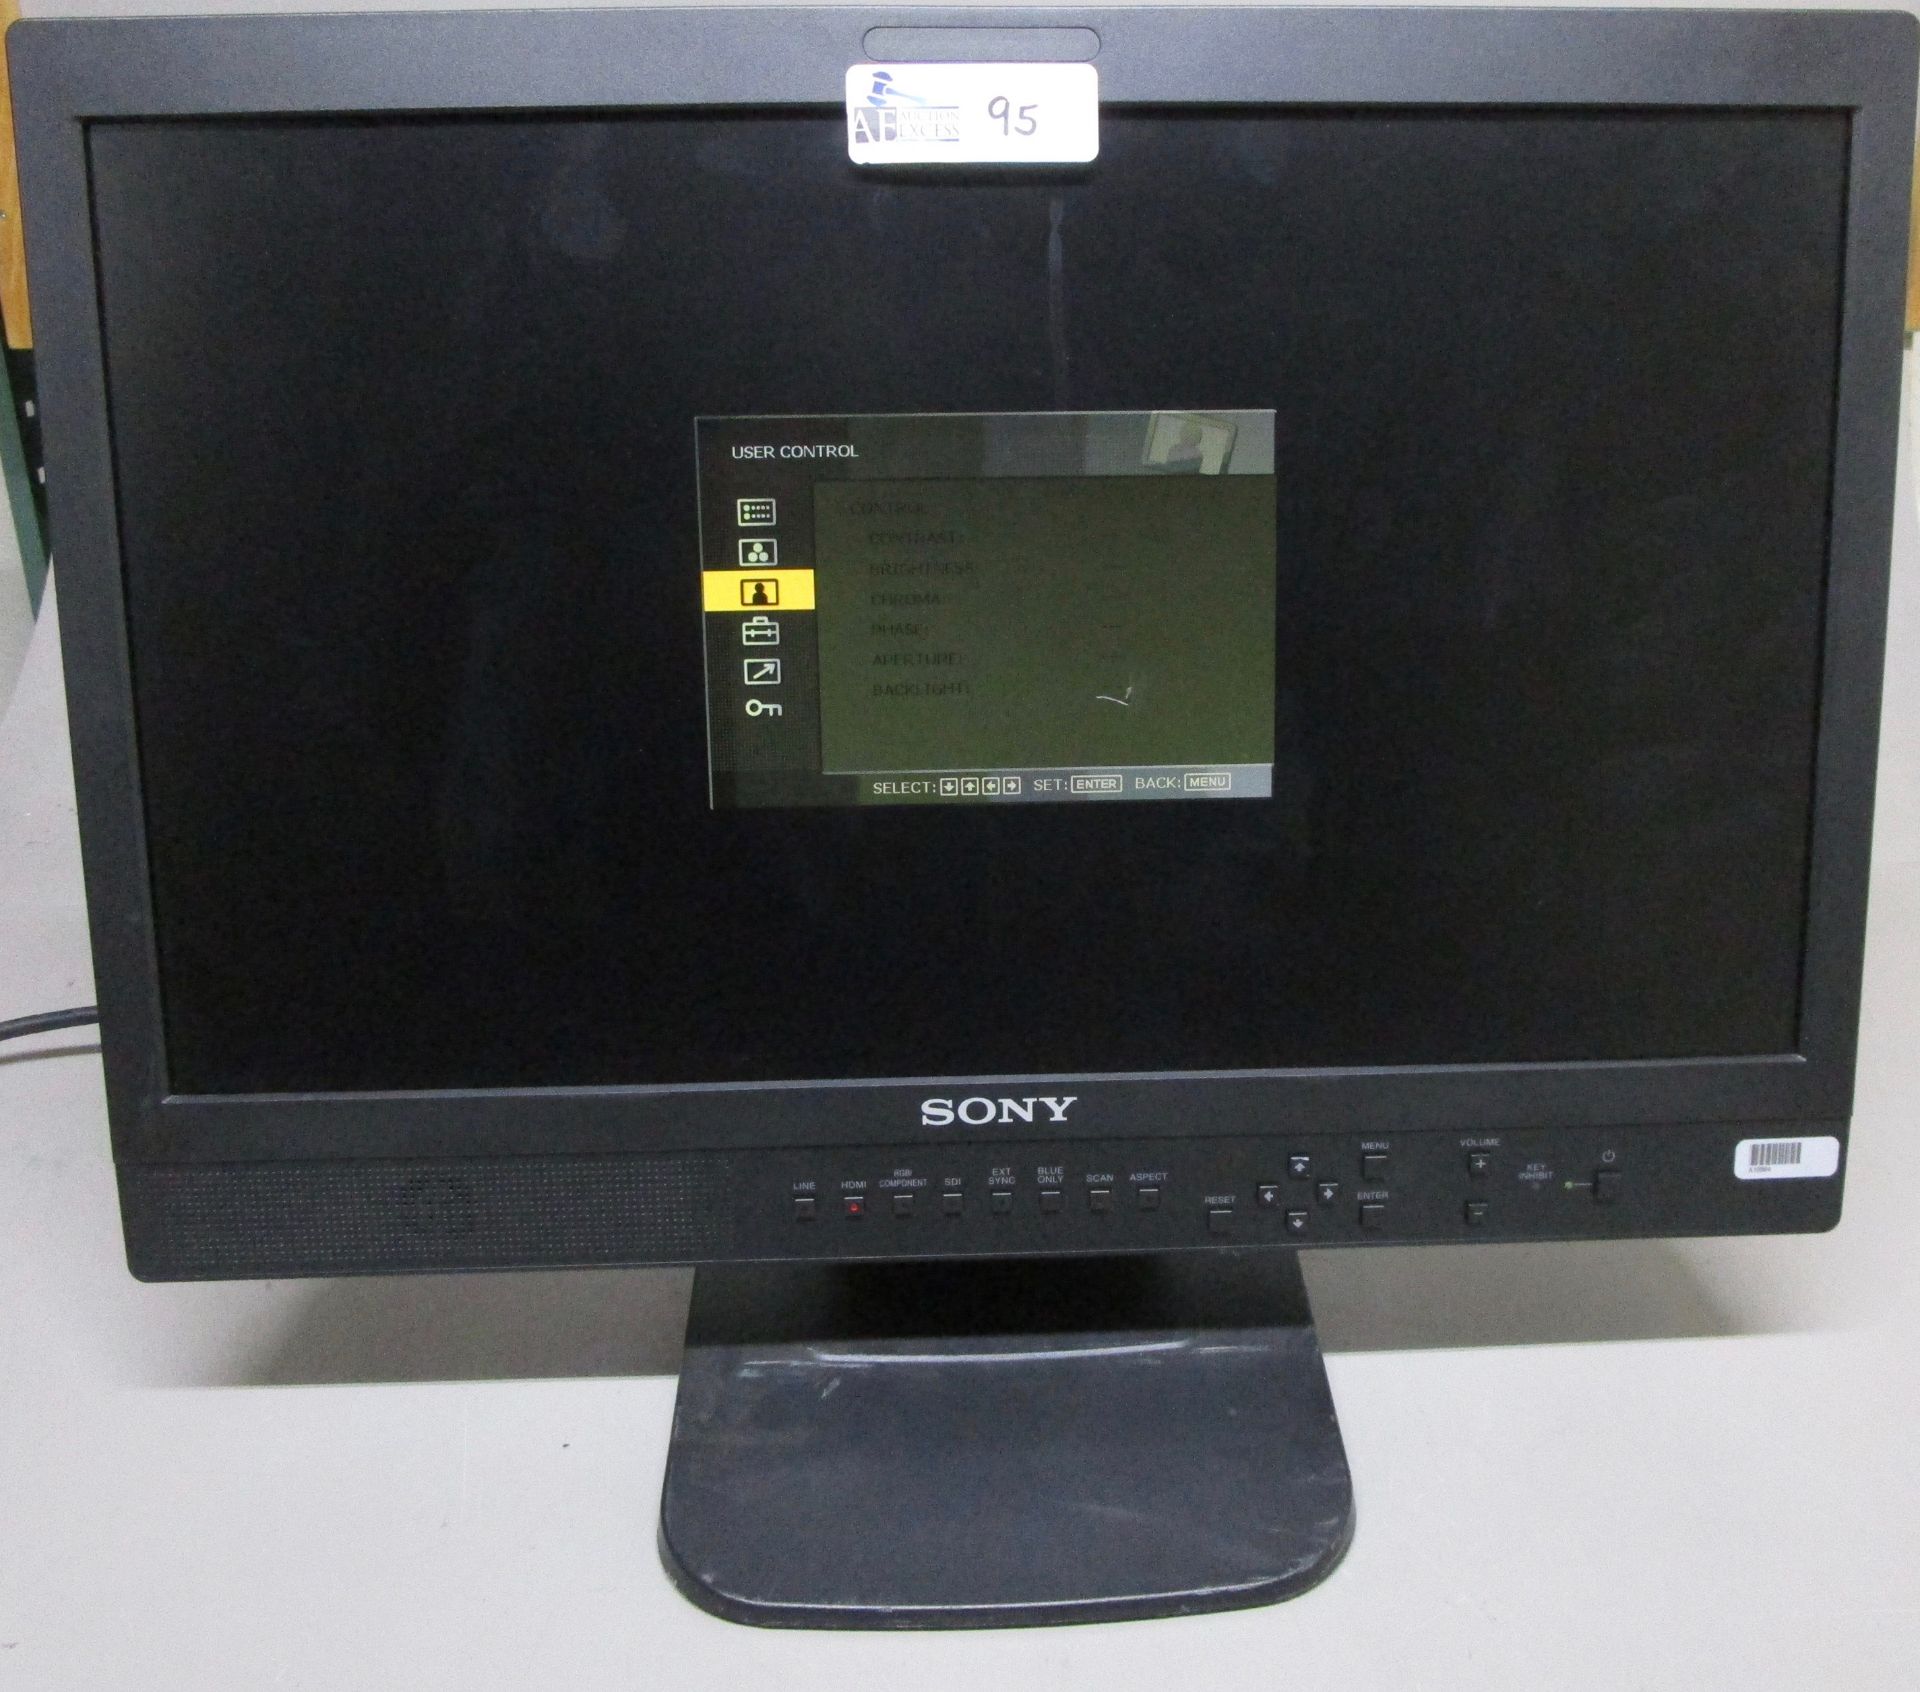 SONY LMD-2110W LCD MONITOR - Image 2 of 2